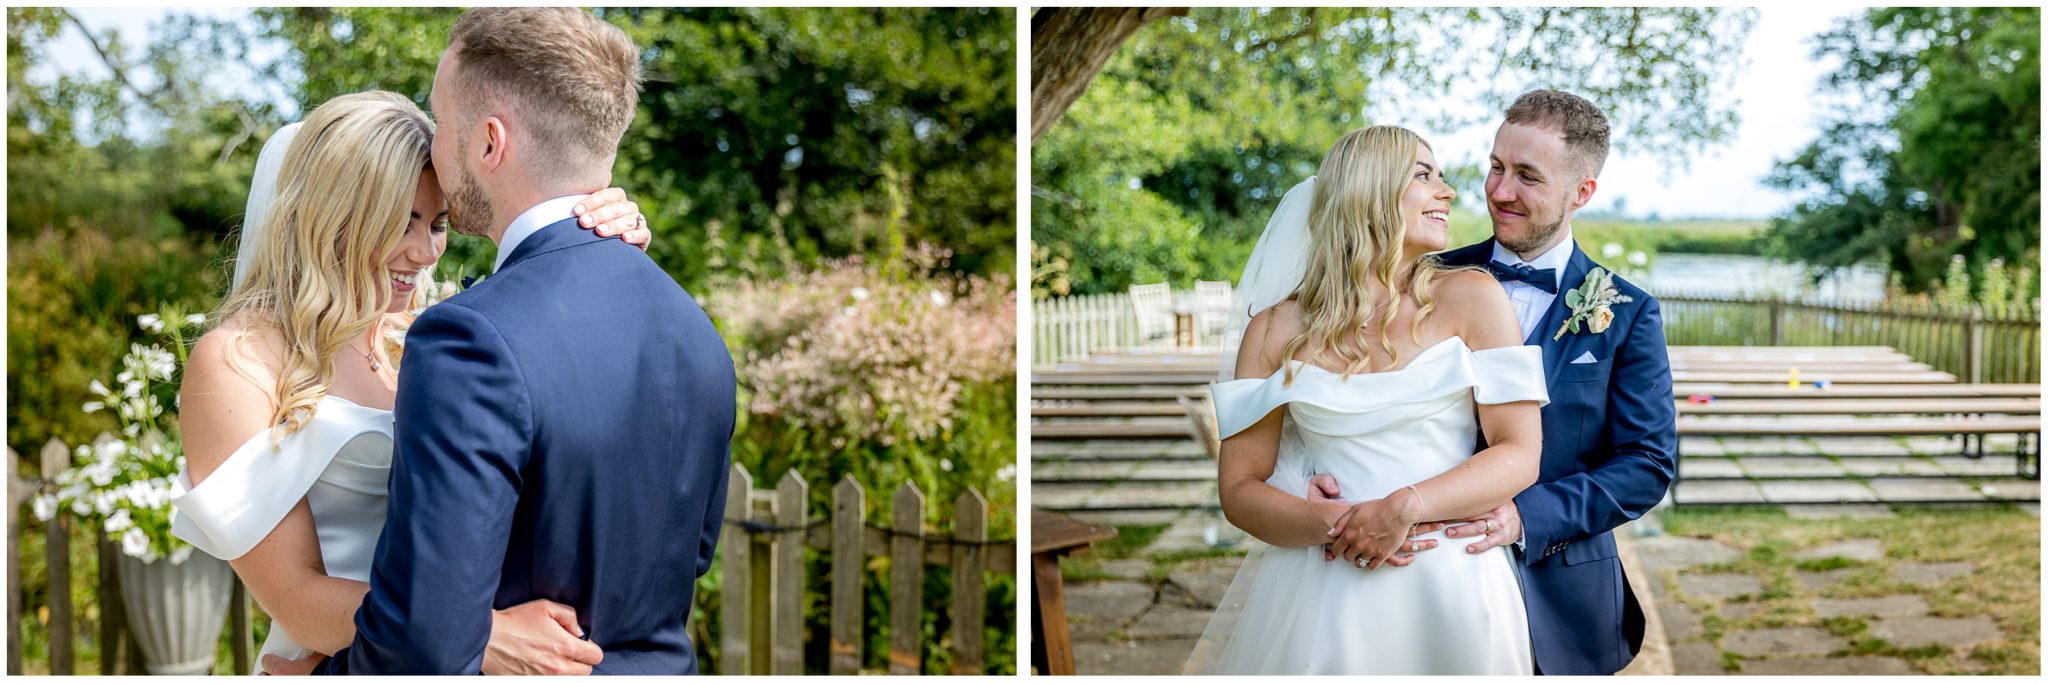 Bride and groom colour portraits by the river next to the outdoor ceremony area